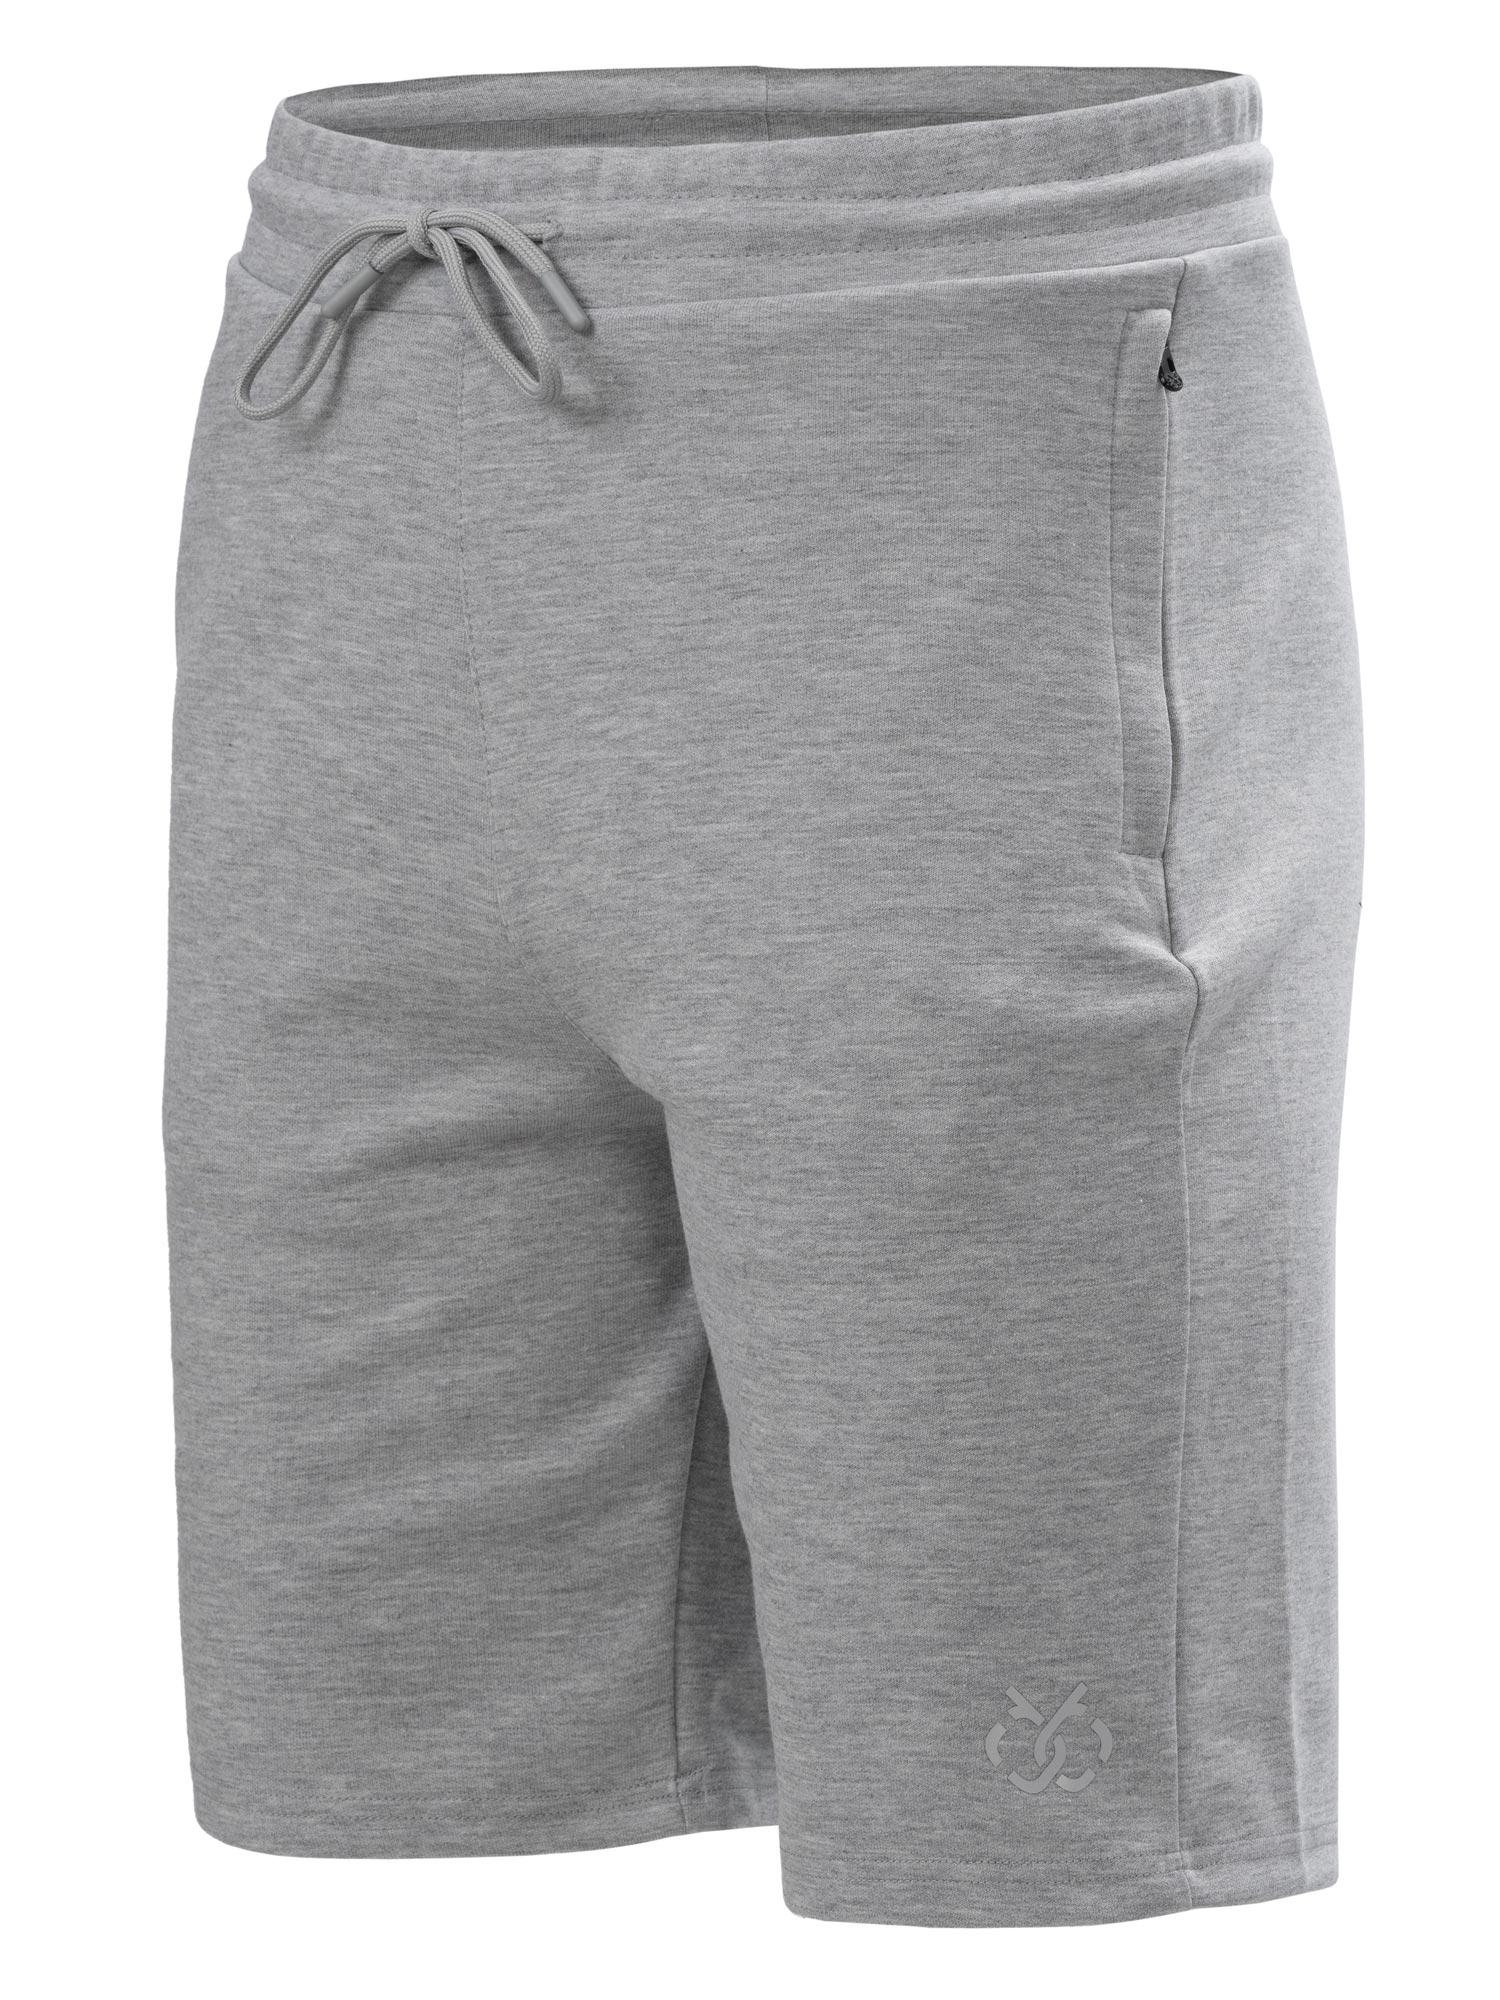 Selected image for BRILLE Muški šorts Terry II Shorts sivi